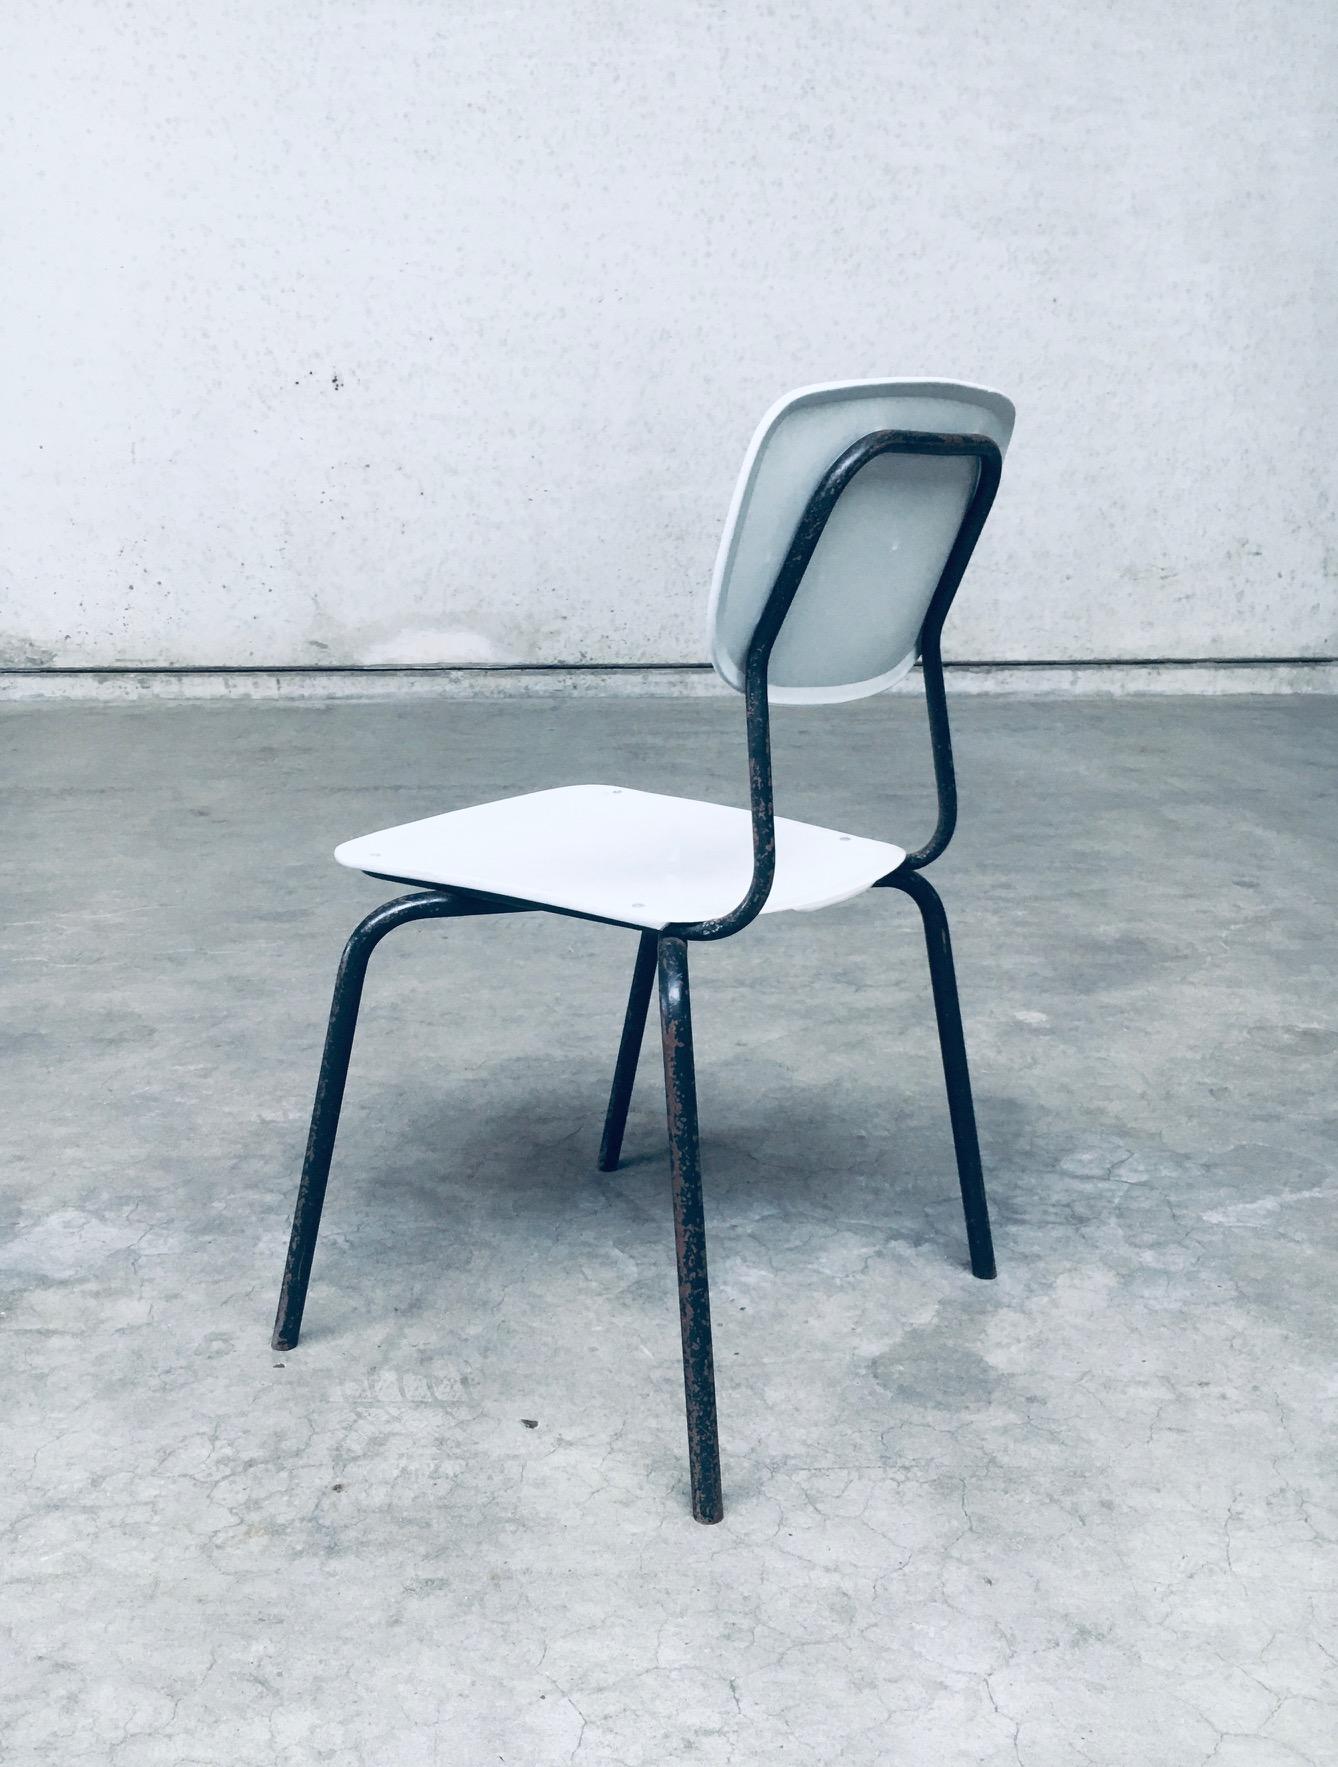 1960's Dutch Industrial Design Stacking Chairs For Sale 4